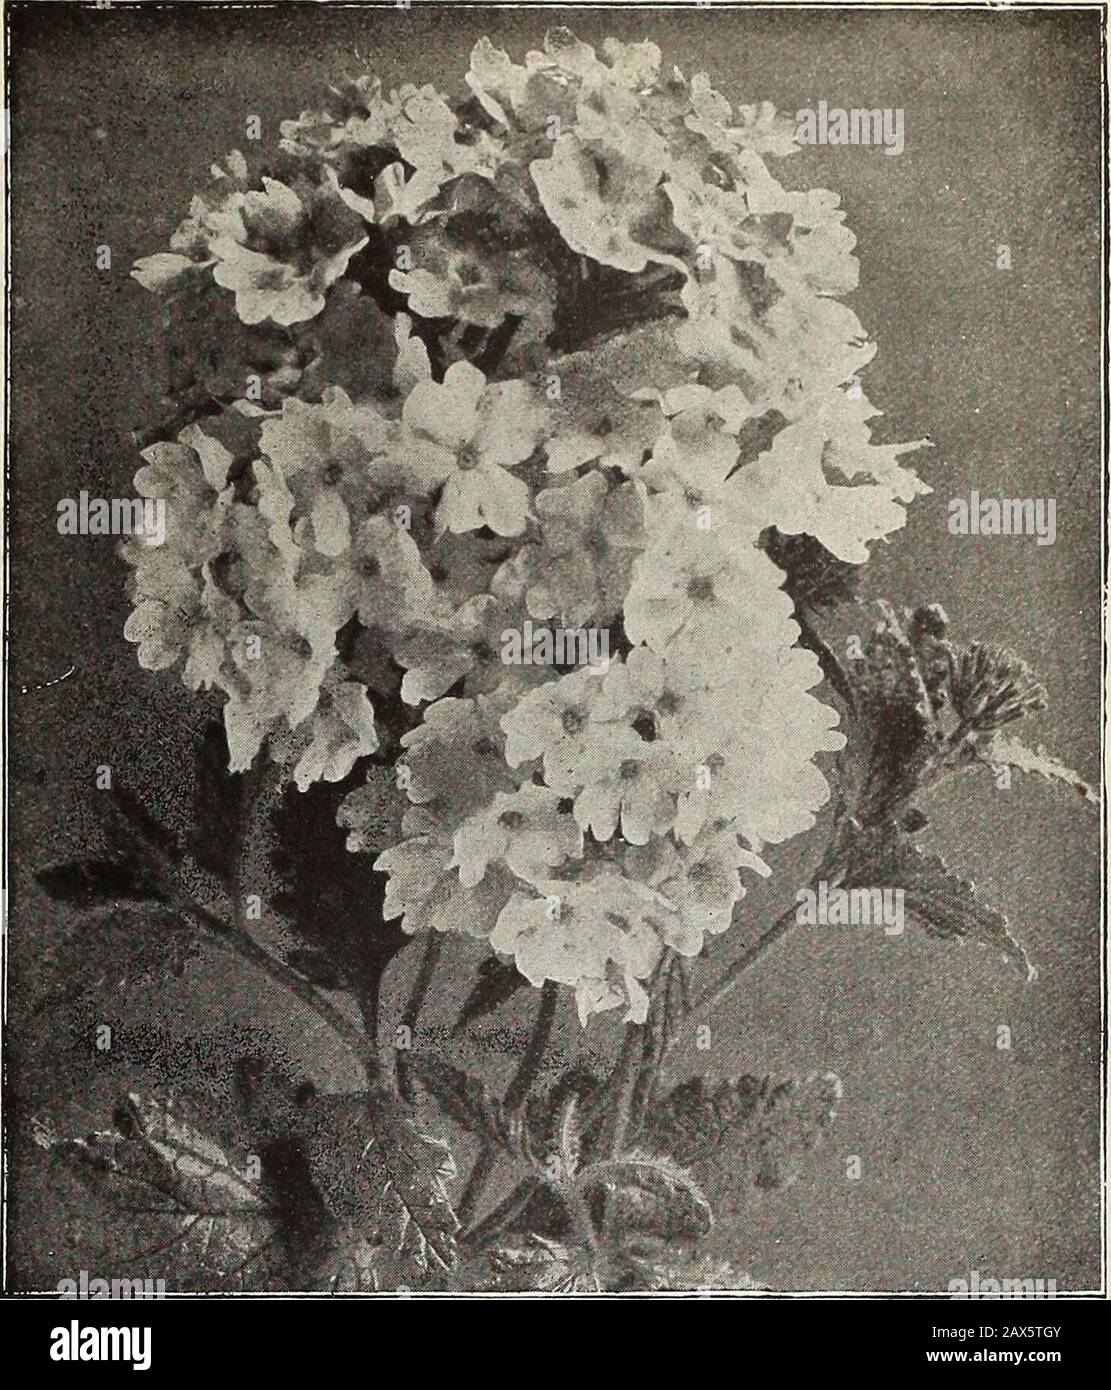 Currie's farm and garden annual : spring 1915 . ixed—% OZ. 15c 5 Golden Leaved—Its foliage is a beautiful yel-low color, and contrasts admirably with the various pleasing shades of the flowers 10 HYBRID A GIG ANTB A, New Giant FloweringVerbena—This is a distinctly new class ofGiant Flowering- Verbenas excelling in thesize and noble shape of the flower and therich display of colors and shades which cometrue from Seed, not varying as many valuable strains do 10 Helen YYillmott (Novelty)—For description, see page G 15 VERONICA (Speedwell) H. P.Spicata—Bright blue flowers on a long dense spike 10 Stock Photo